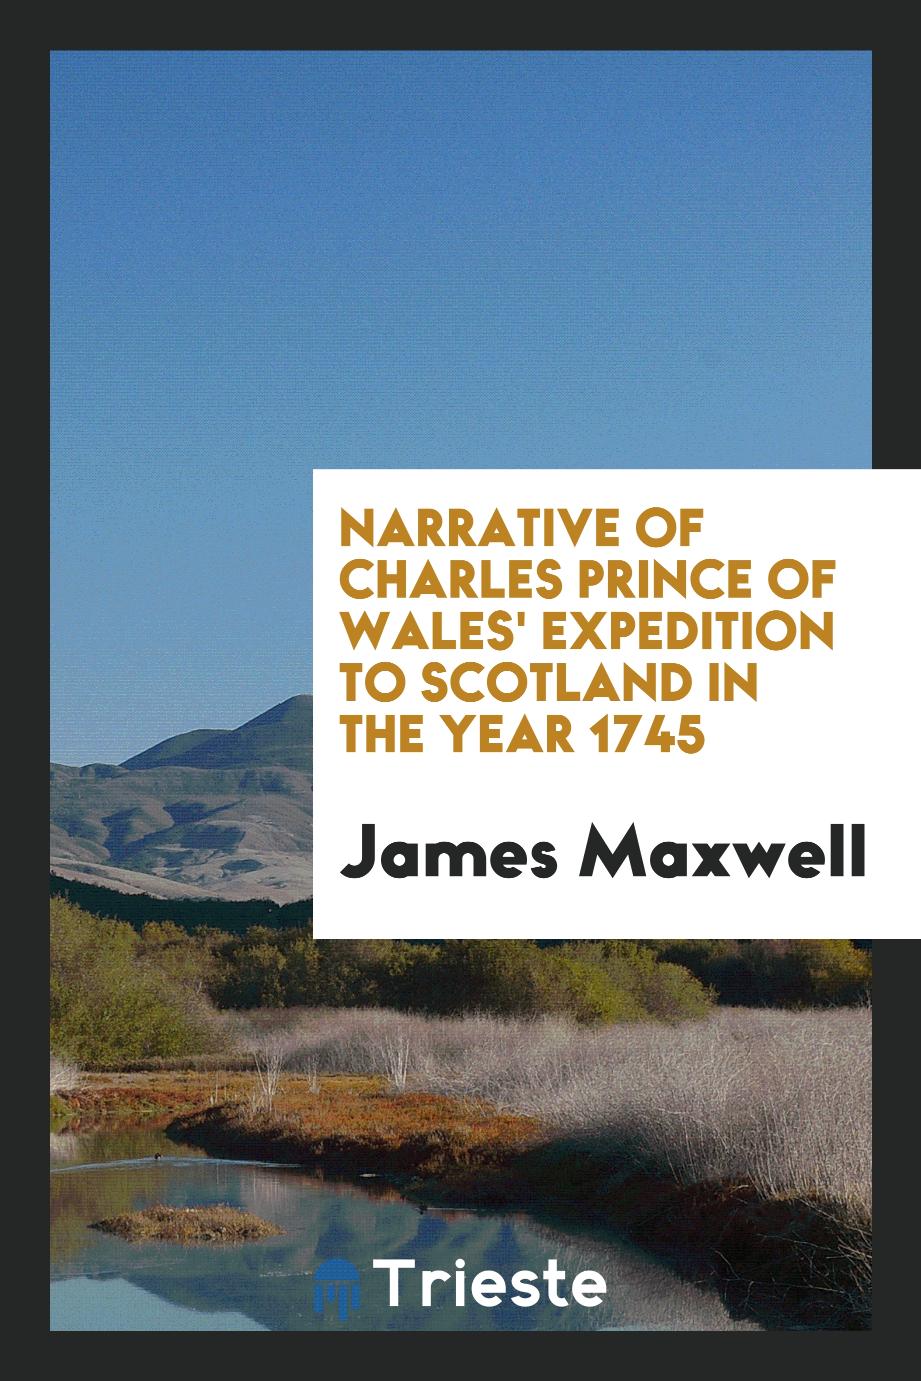 Narrative of Charles Prince of Wales' Expedition to Scotland in the Year 1745